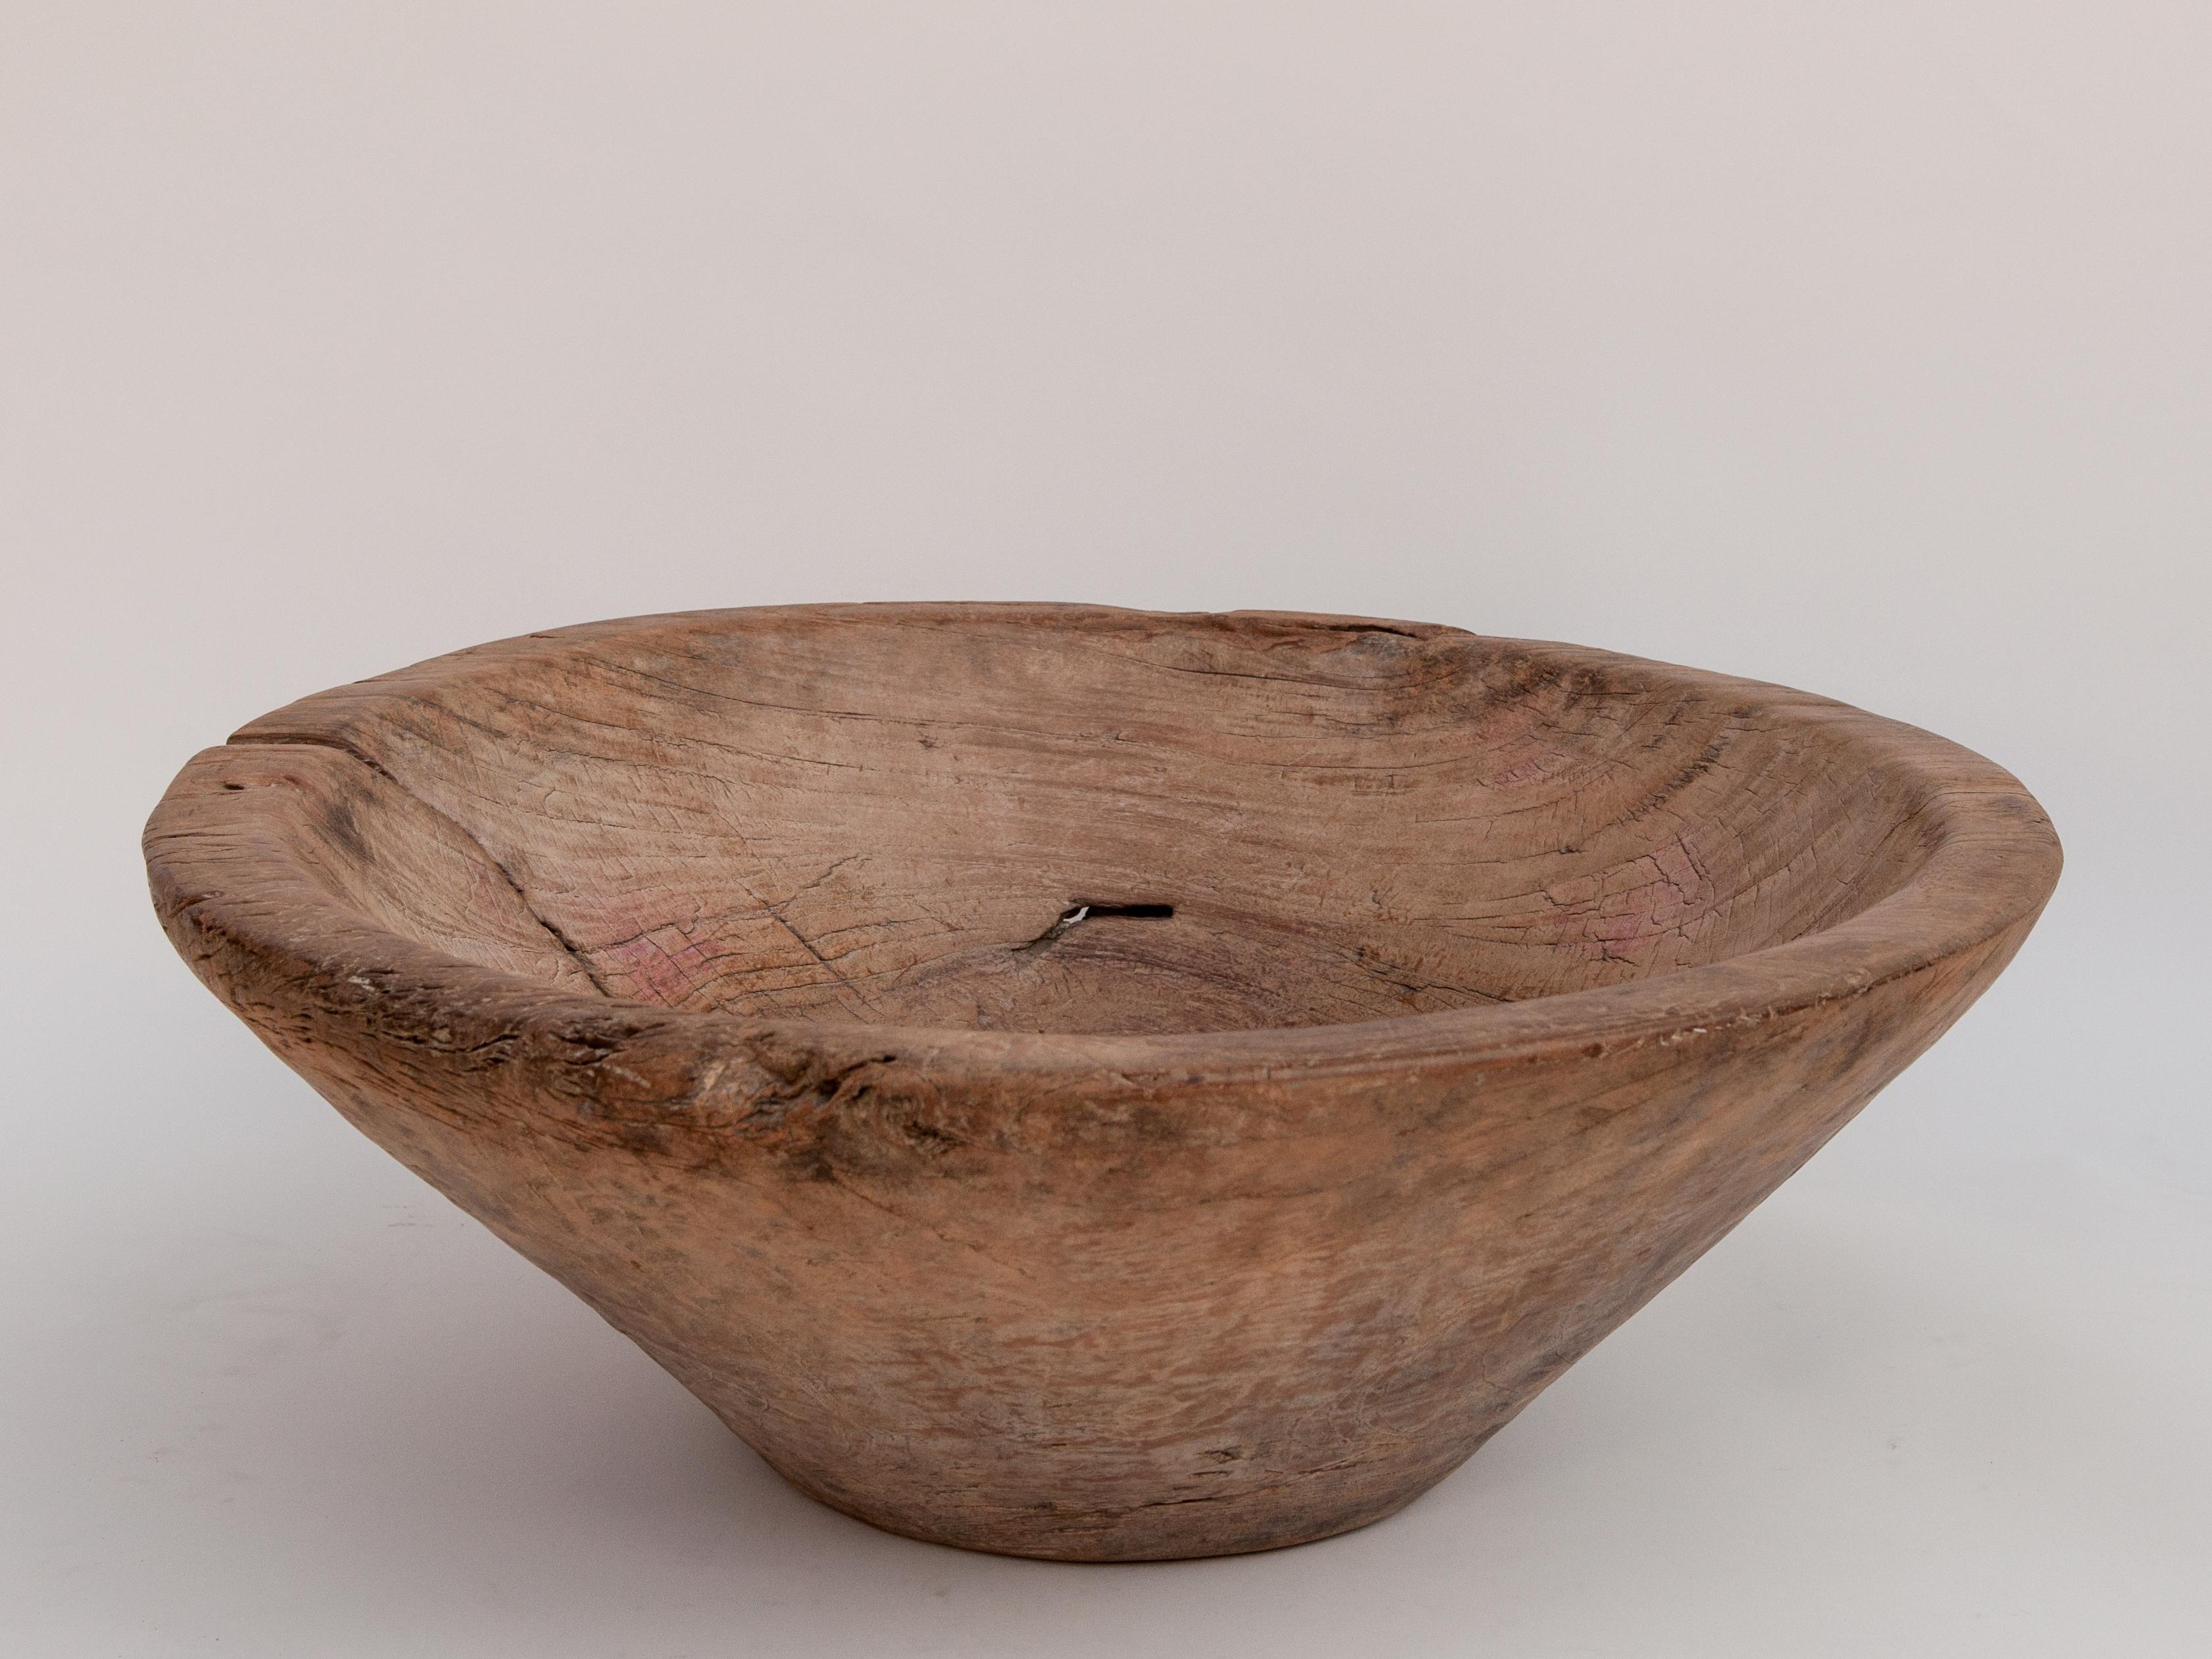 Large vintage teak wood bowl, 24 inch Diameter by 9 inches tall. From Cirebon, North Java, Mid-20th Century.
This rustic wood bowl was fashioned by hand from a single piece of teak wood and comes from the Cirebon area of Northern Java. It would